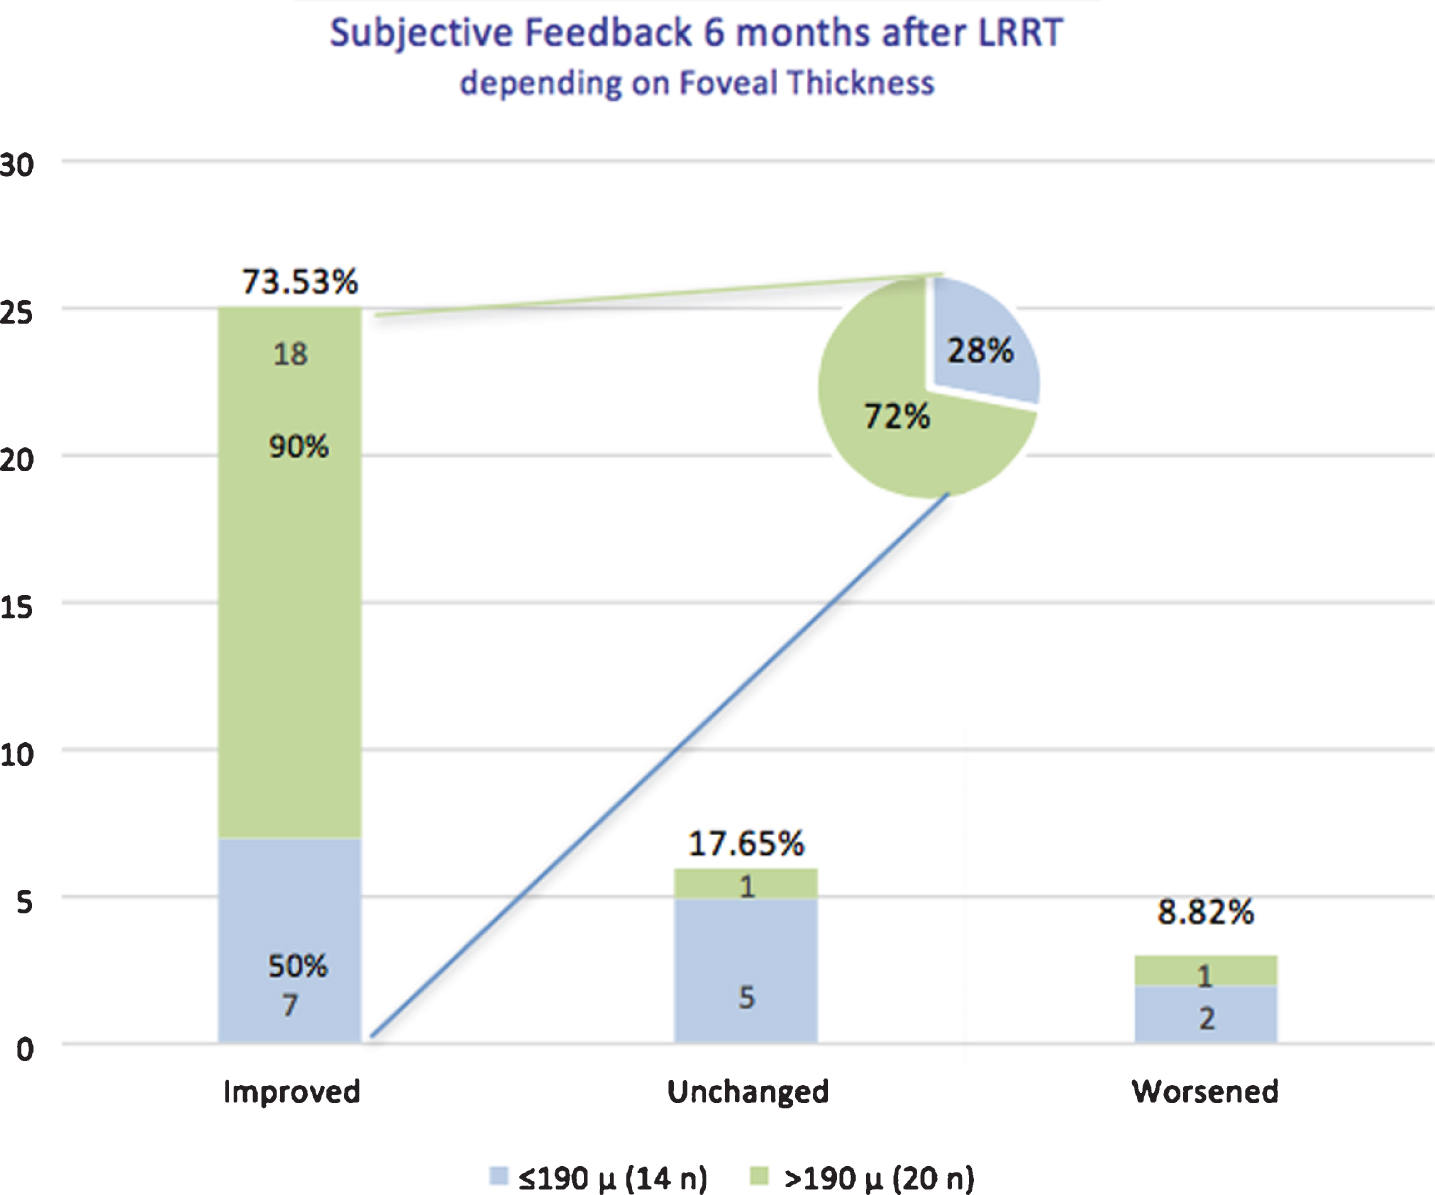 Compliance analysis of retinitis pigmentosa (RP) patients at 6 months (T180) post Limoli Retinal Restoration Technique (LRRT) depending on foveal thickness: compliance was good in 73.53% of all cases (both Groups A and B). Patients reported to see better 6 months after surgery, but the percentage reached 90% in those with FT > 190μm. If we considered only the improved group (25 eyes), 18 eyes (72%) belonged to Group B and 7 eyes (28%) to Group A.